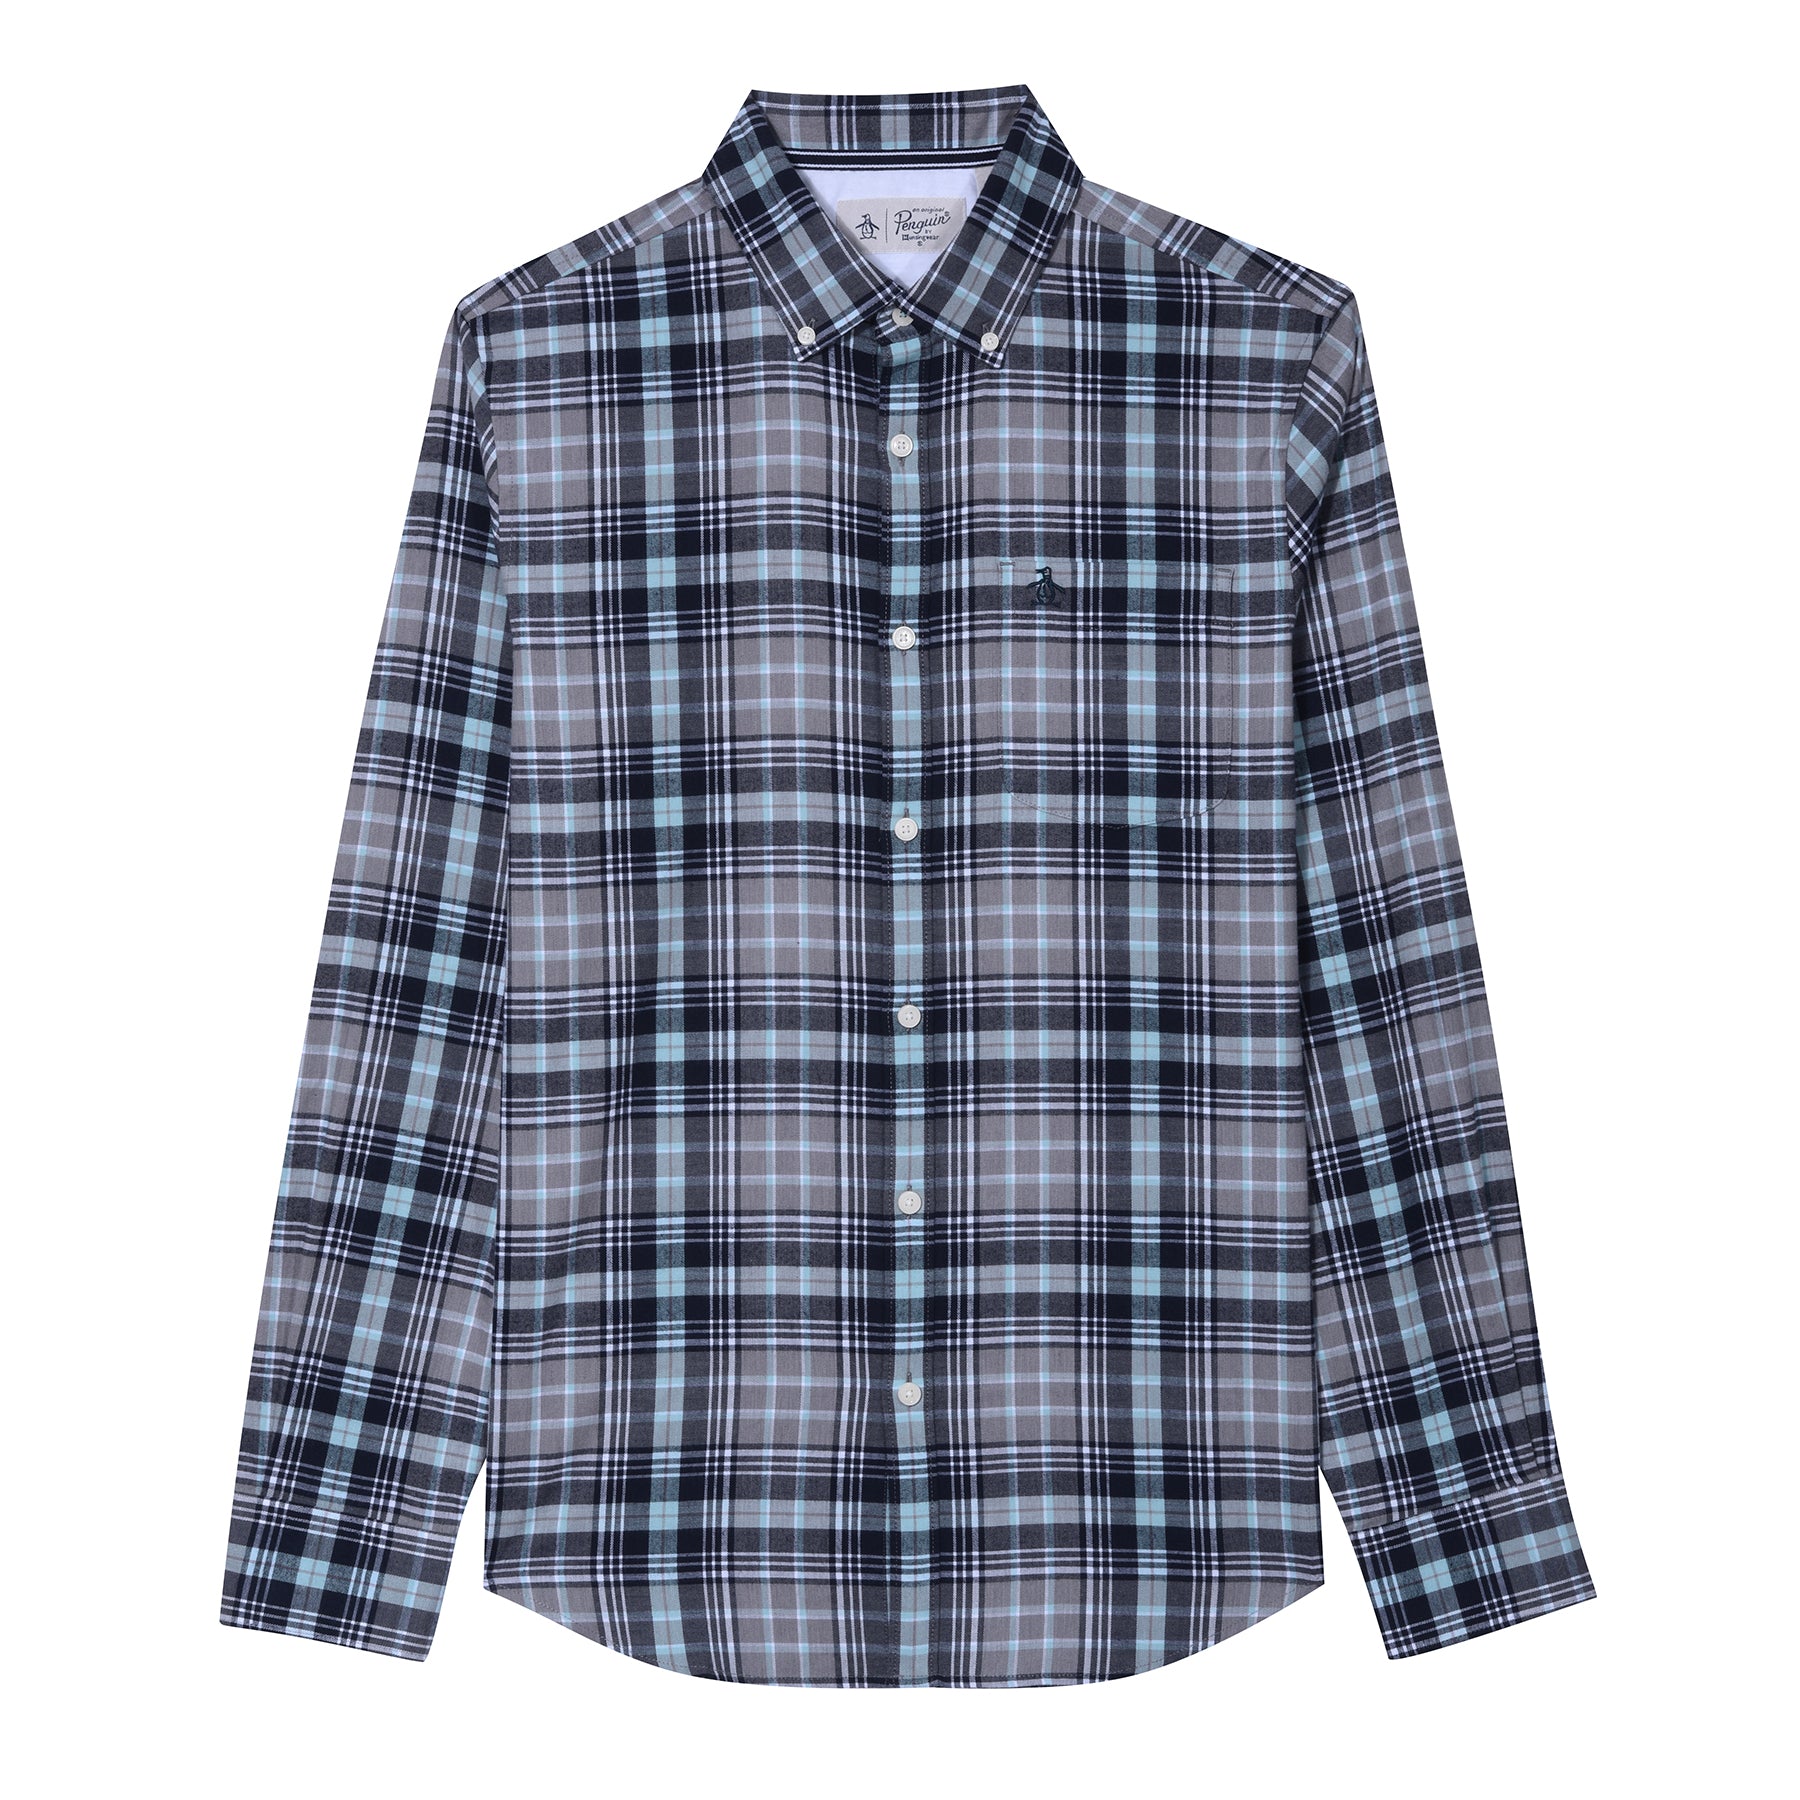 View Brushed Flannel Plaid Shirt In Glacier Gray information